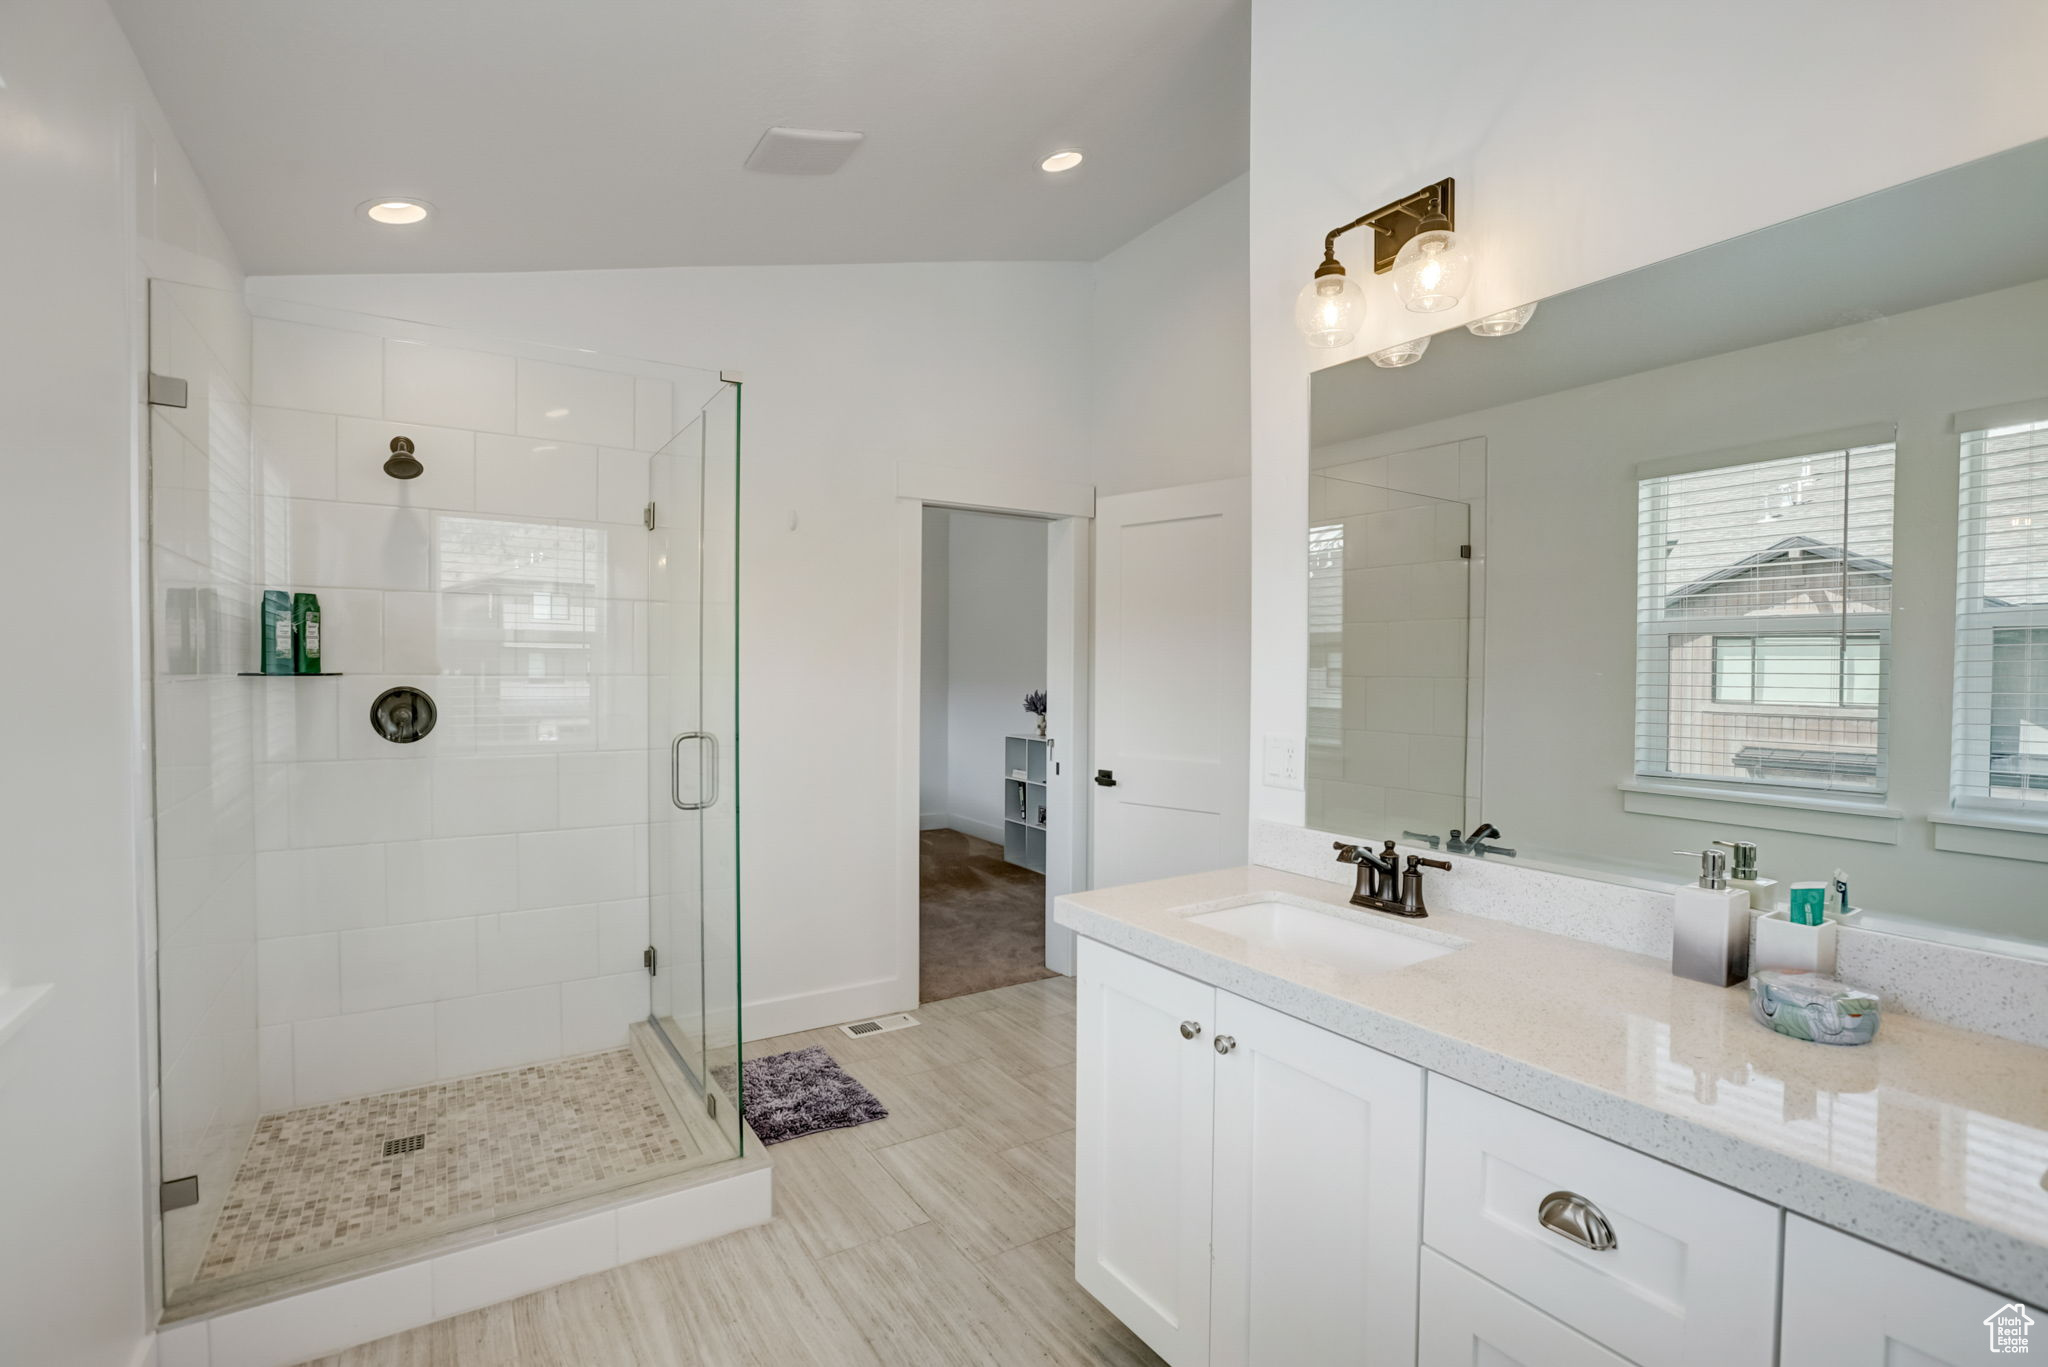 Bathroom featuring lofted ceiling, large vanity, an enclosed shower, and tile flooring